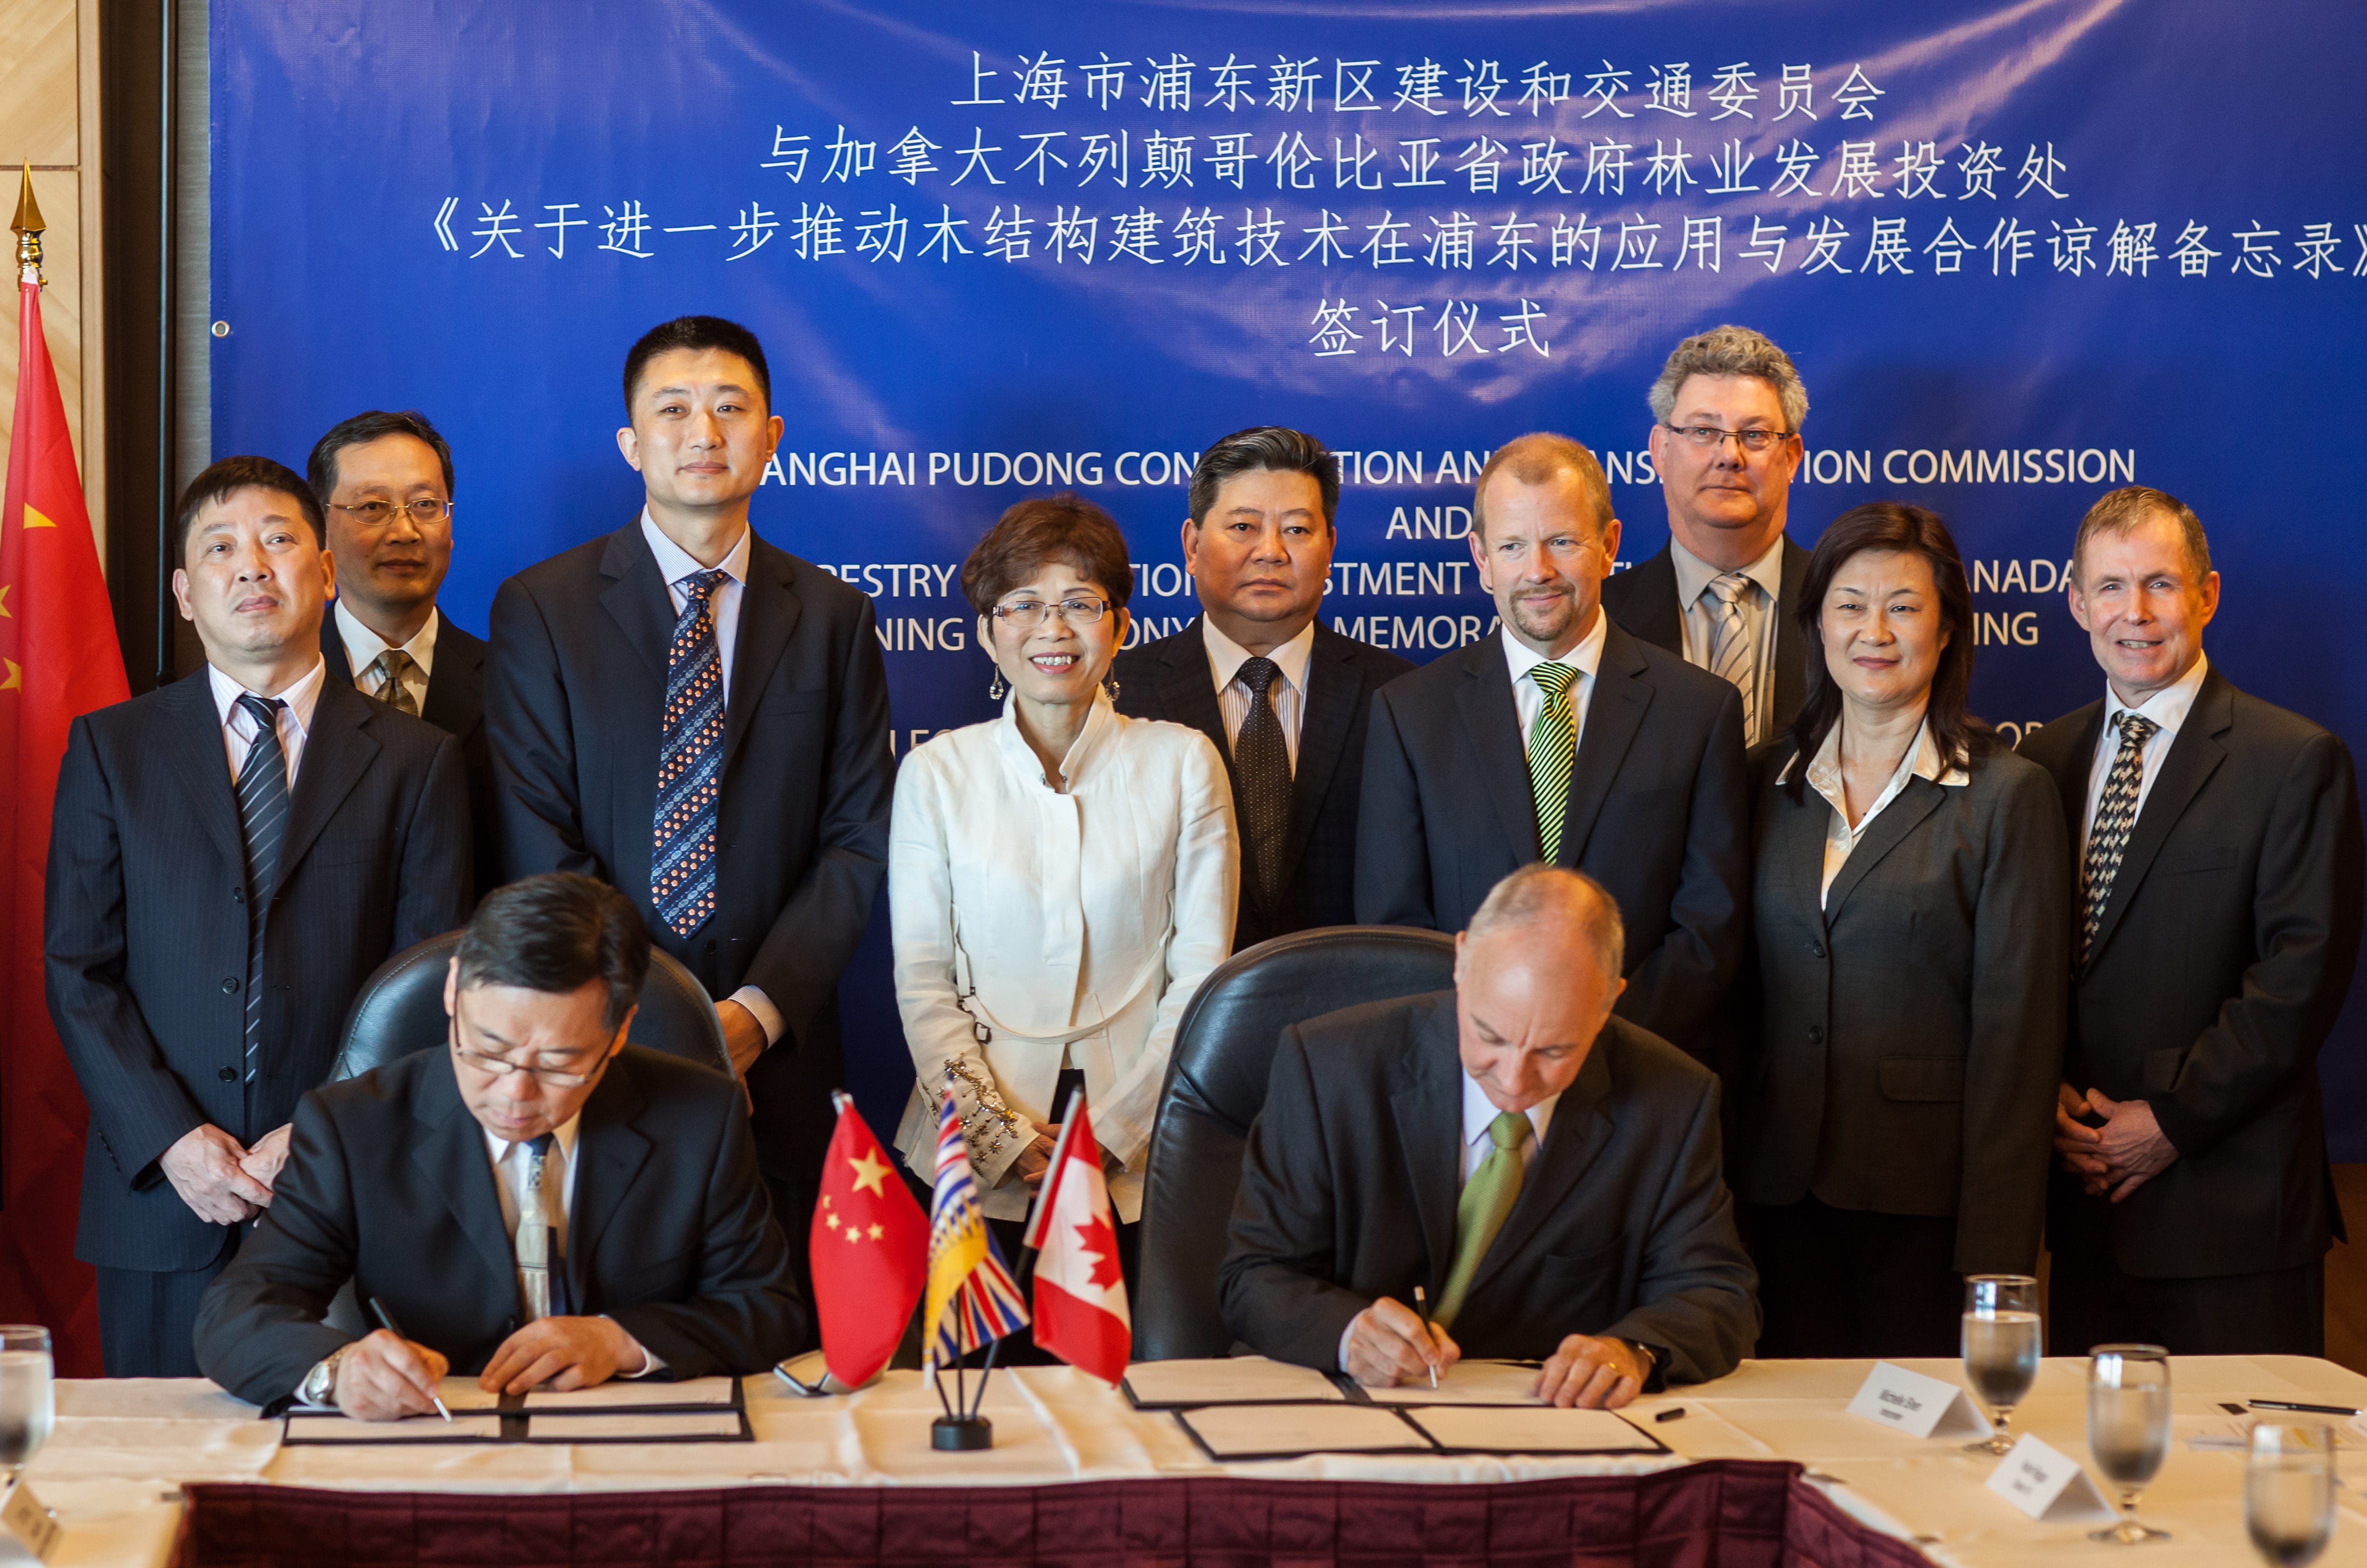 B.C. and Chinese district sign MOU to promote B.C. wood products